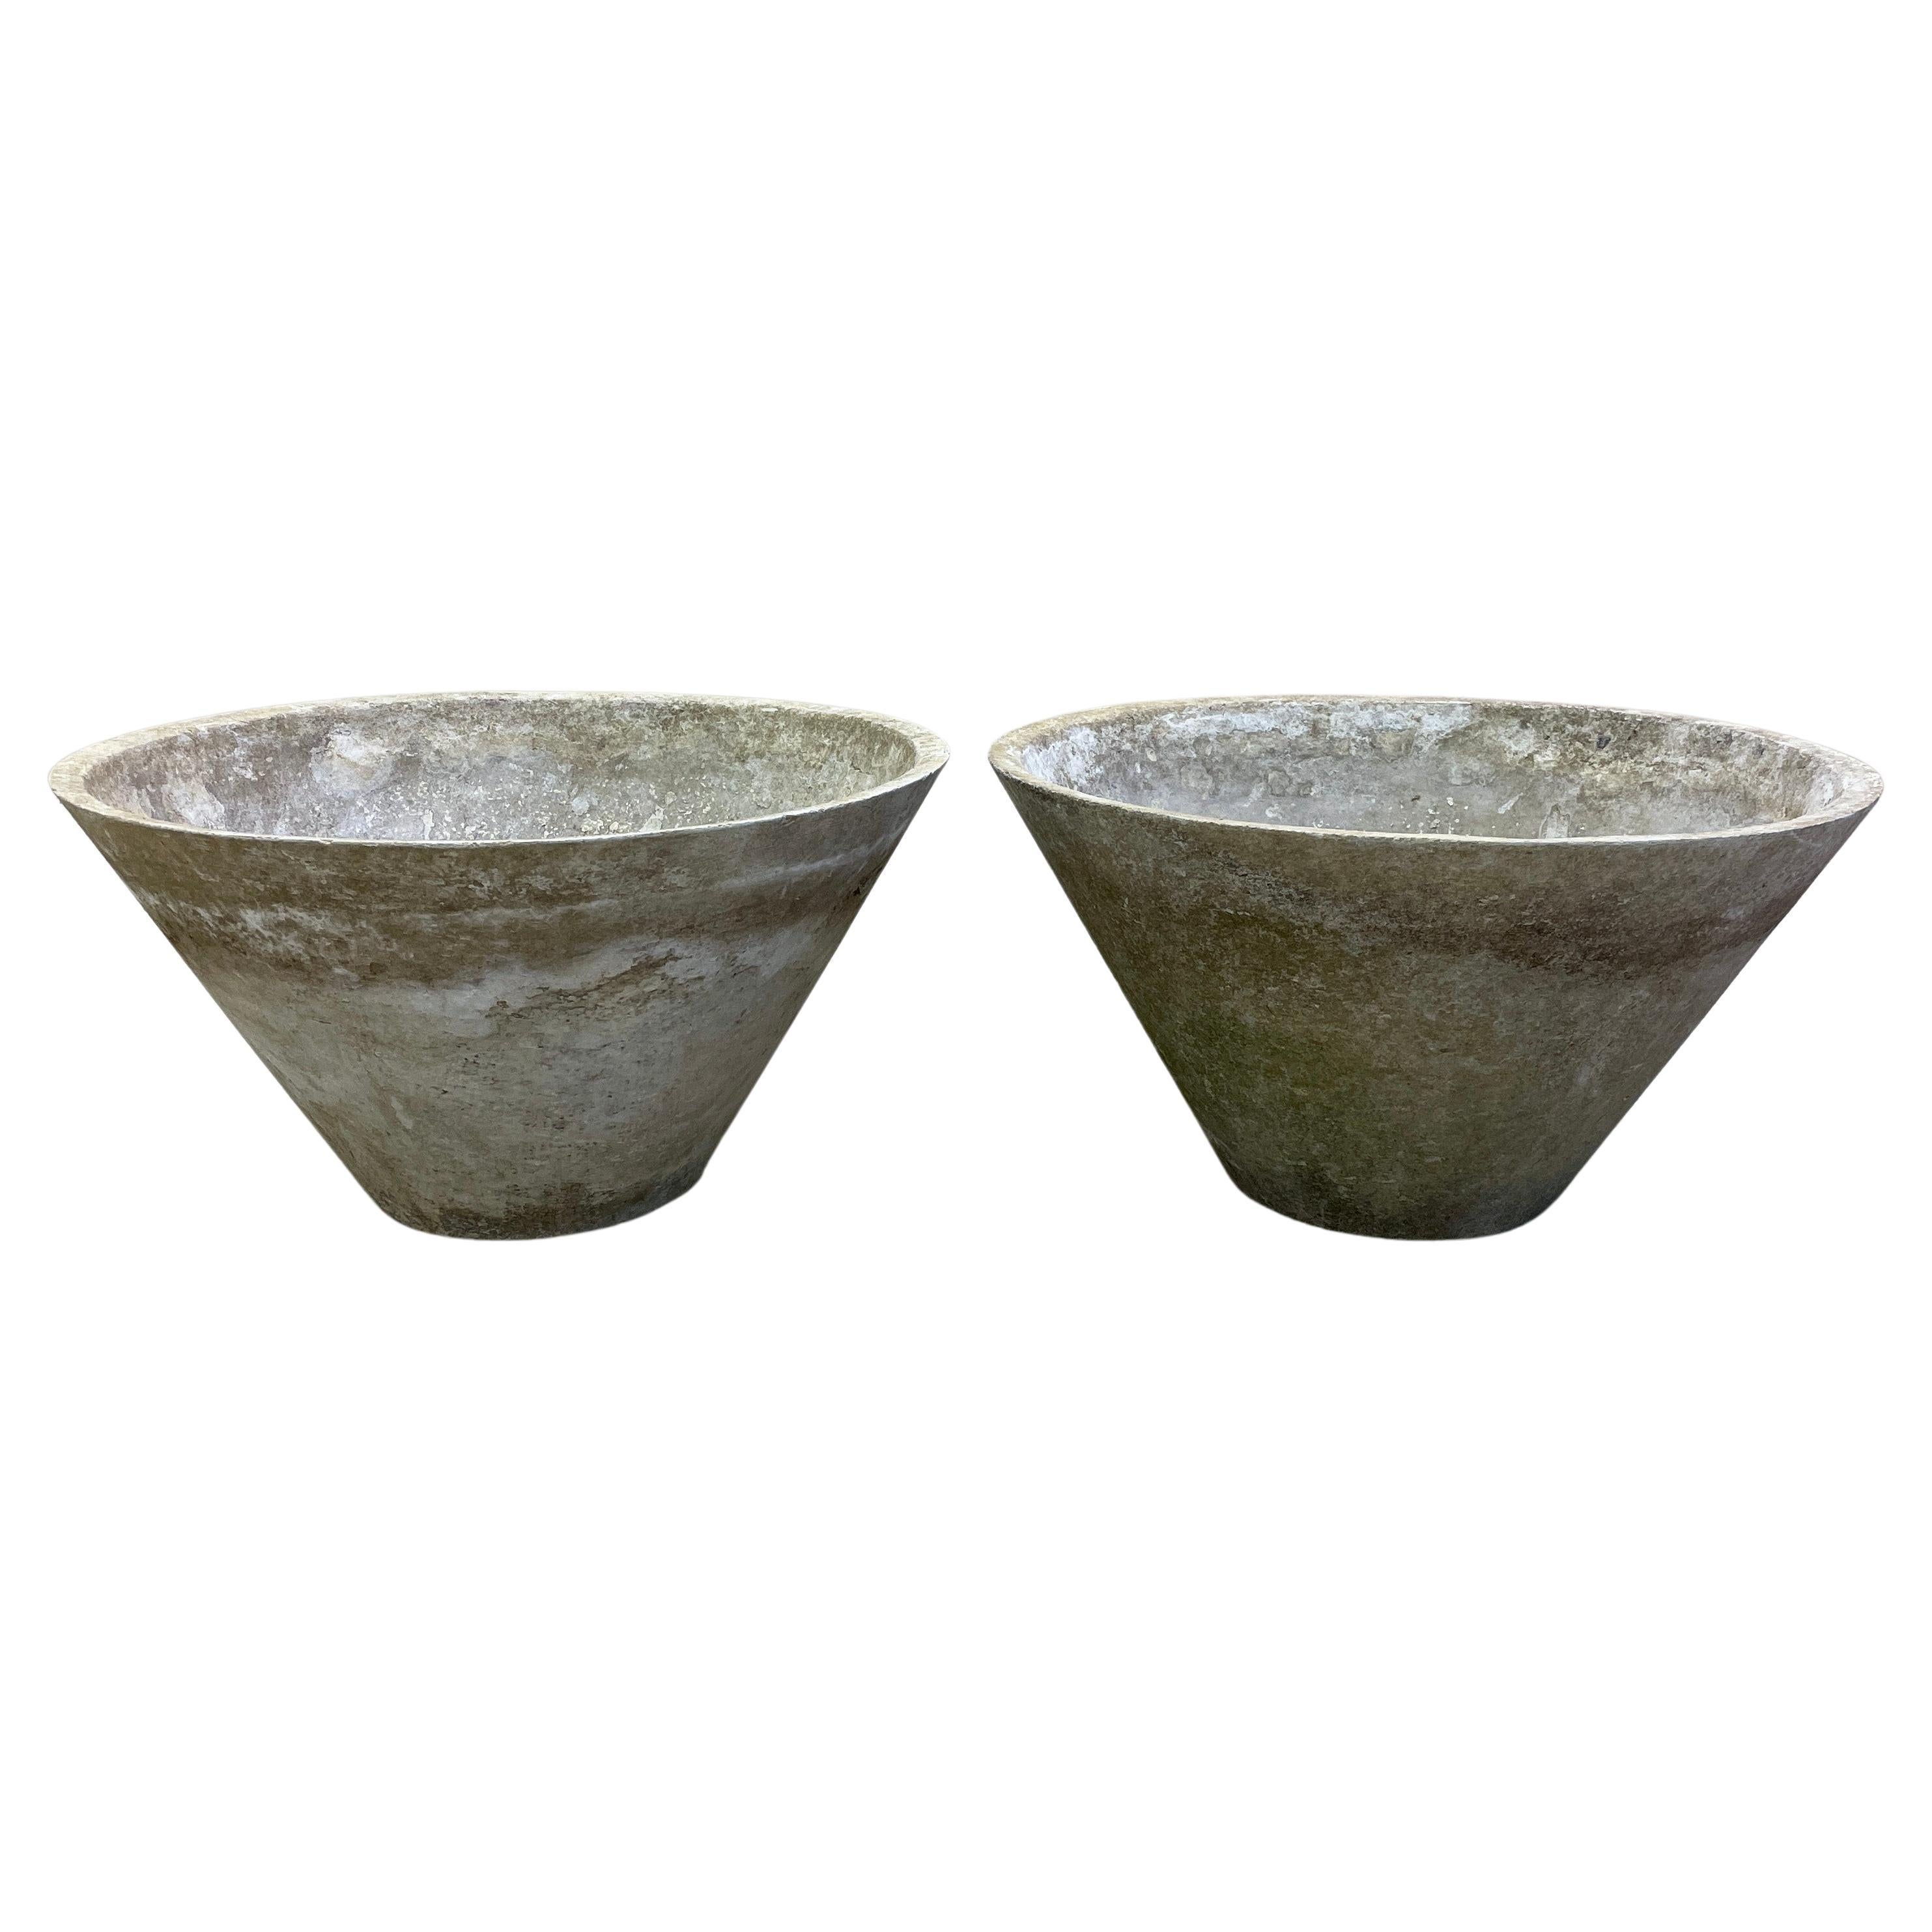 Pair of Willy Guhl Conical Planters #7&8